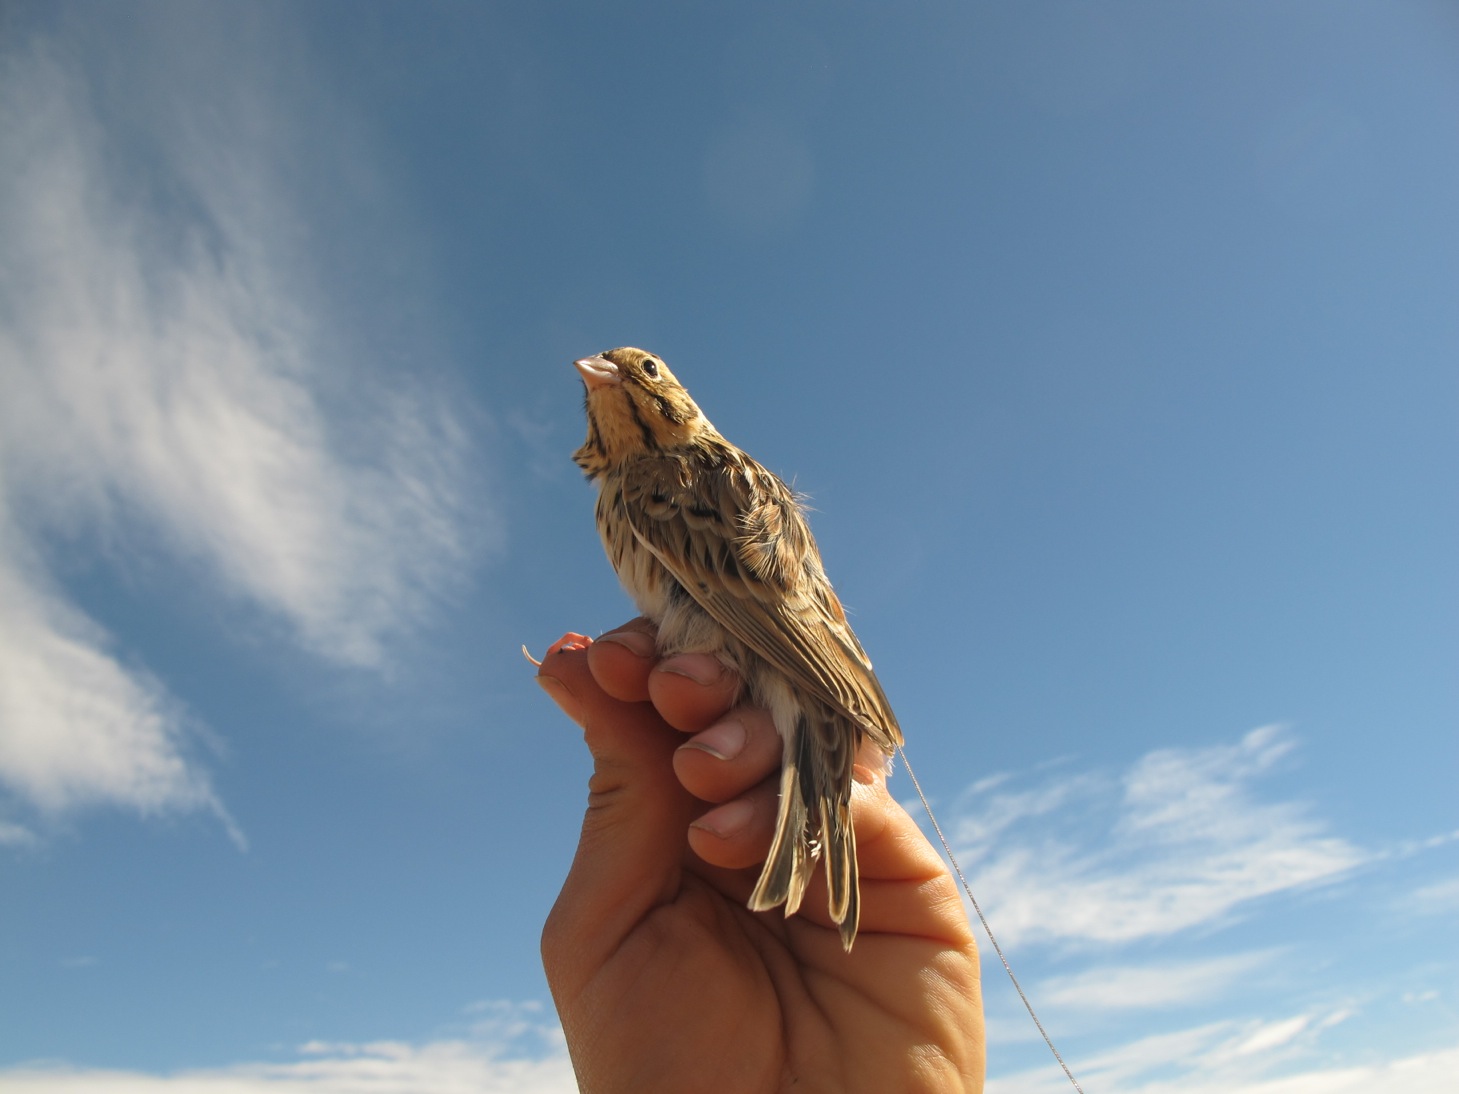 Baird's Sparrow and Transmitter